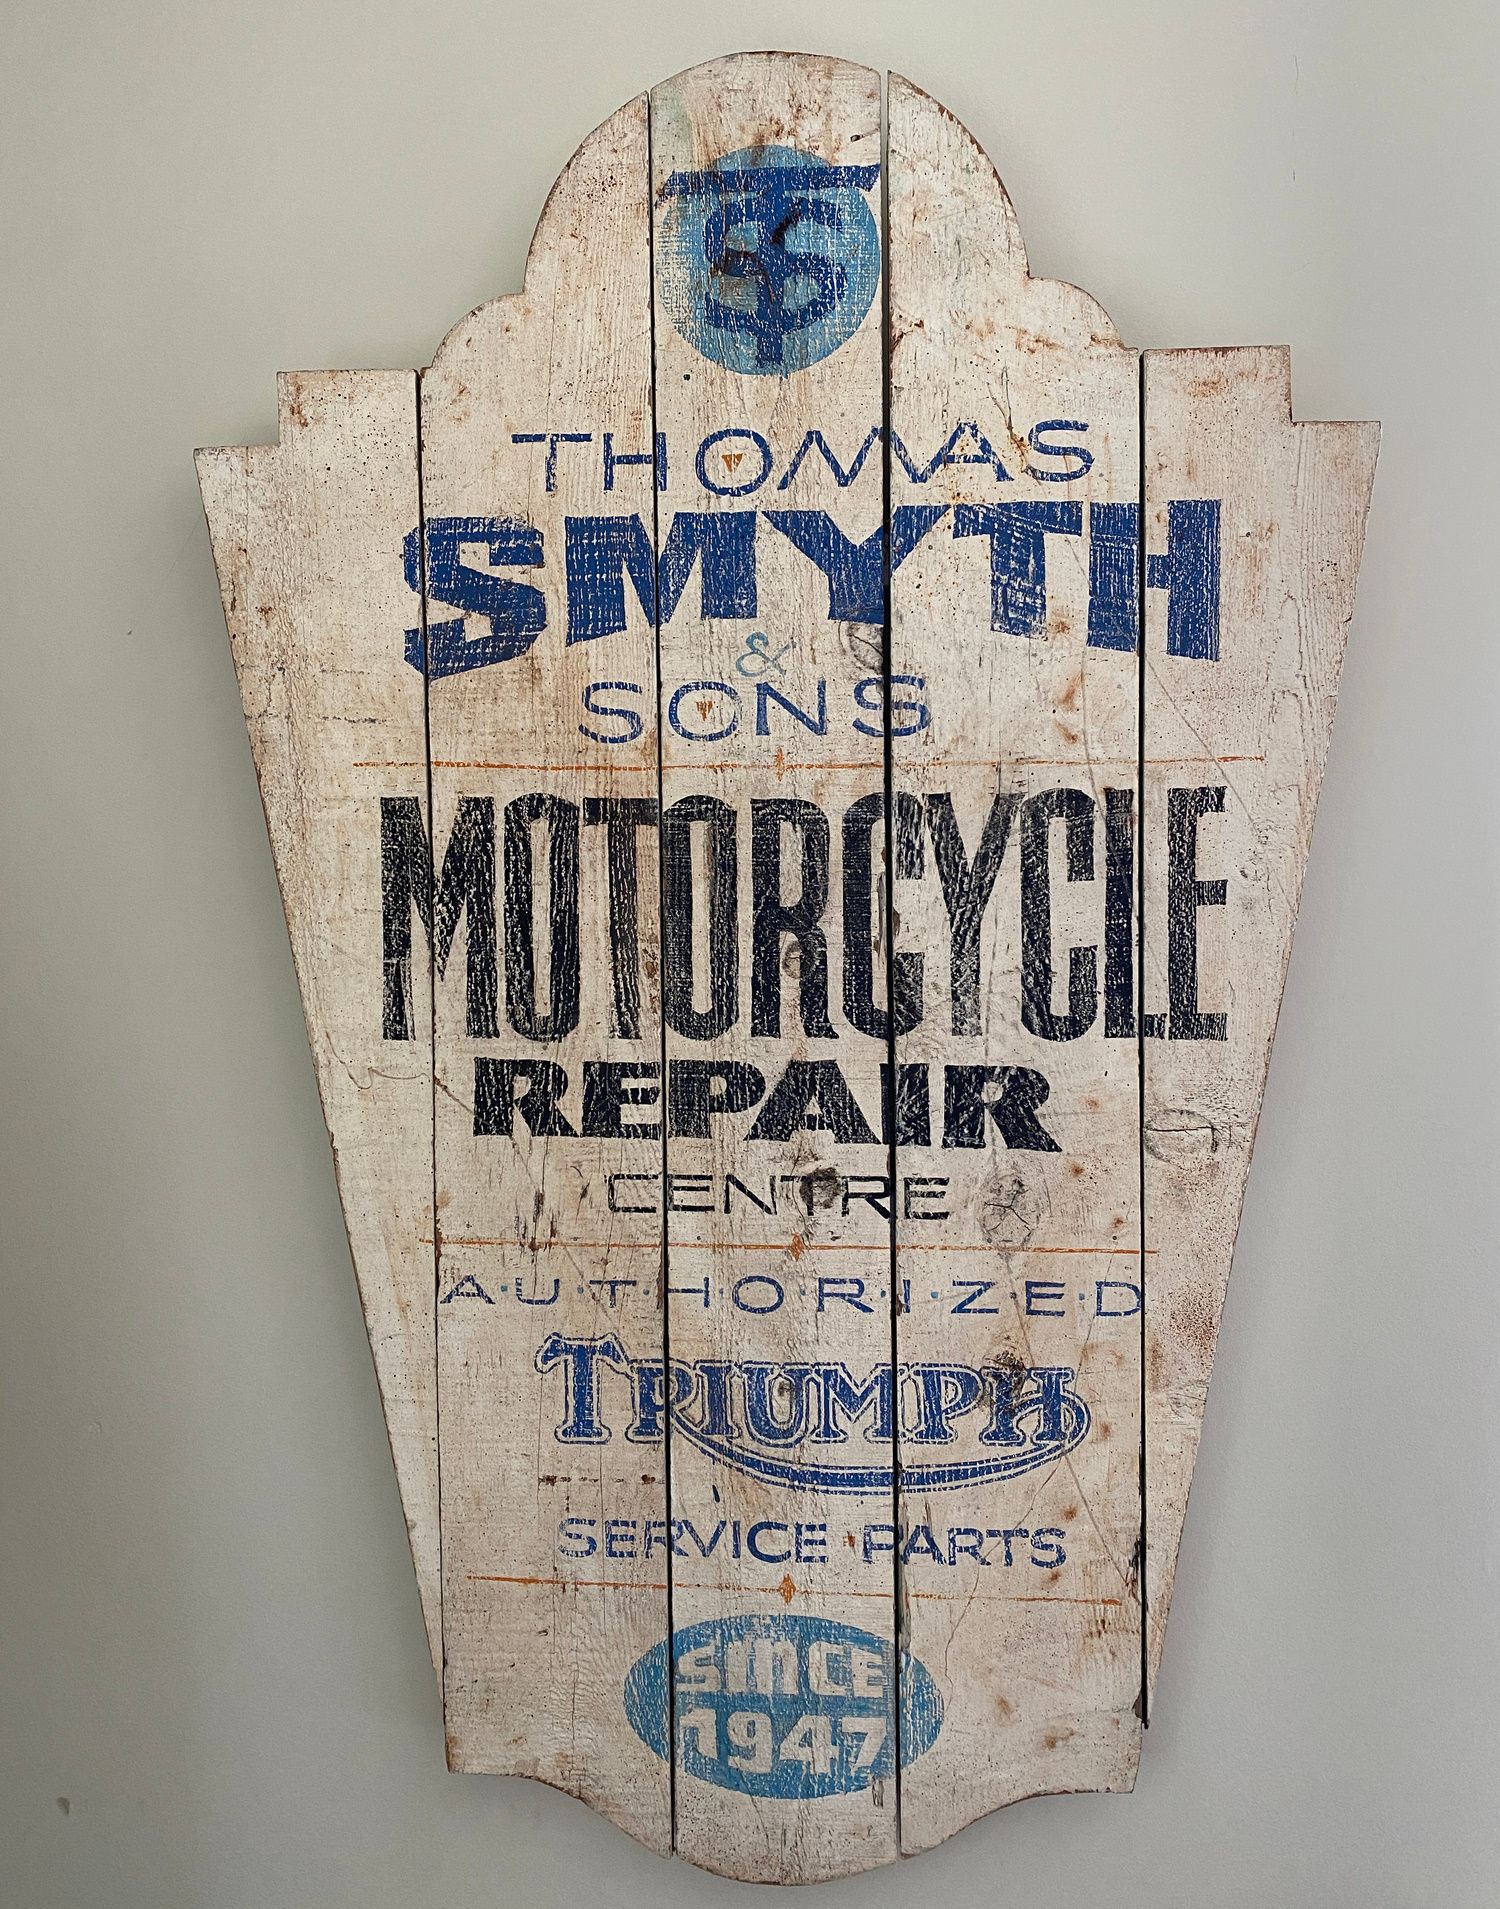 Hand-painted and faux-aged panel for a motorcycle repair centre.